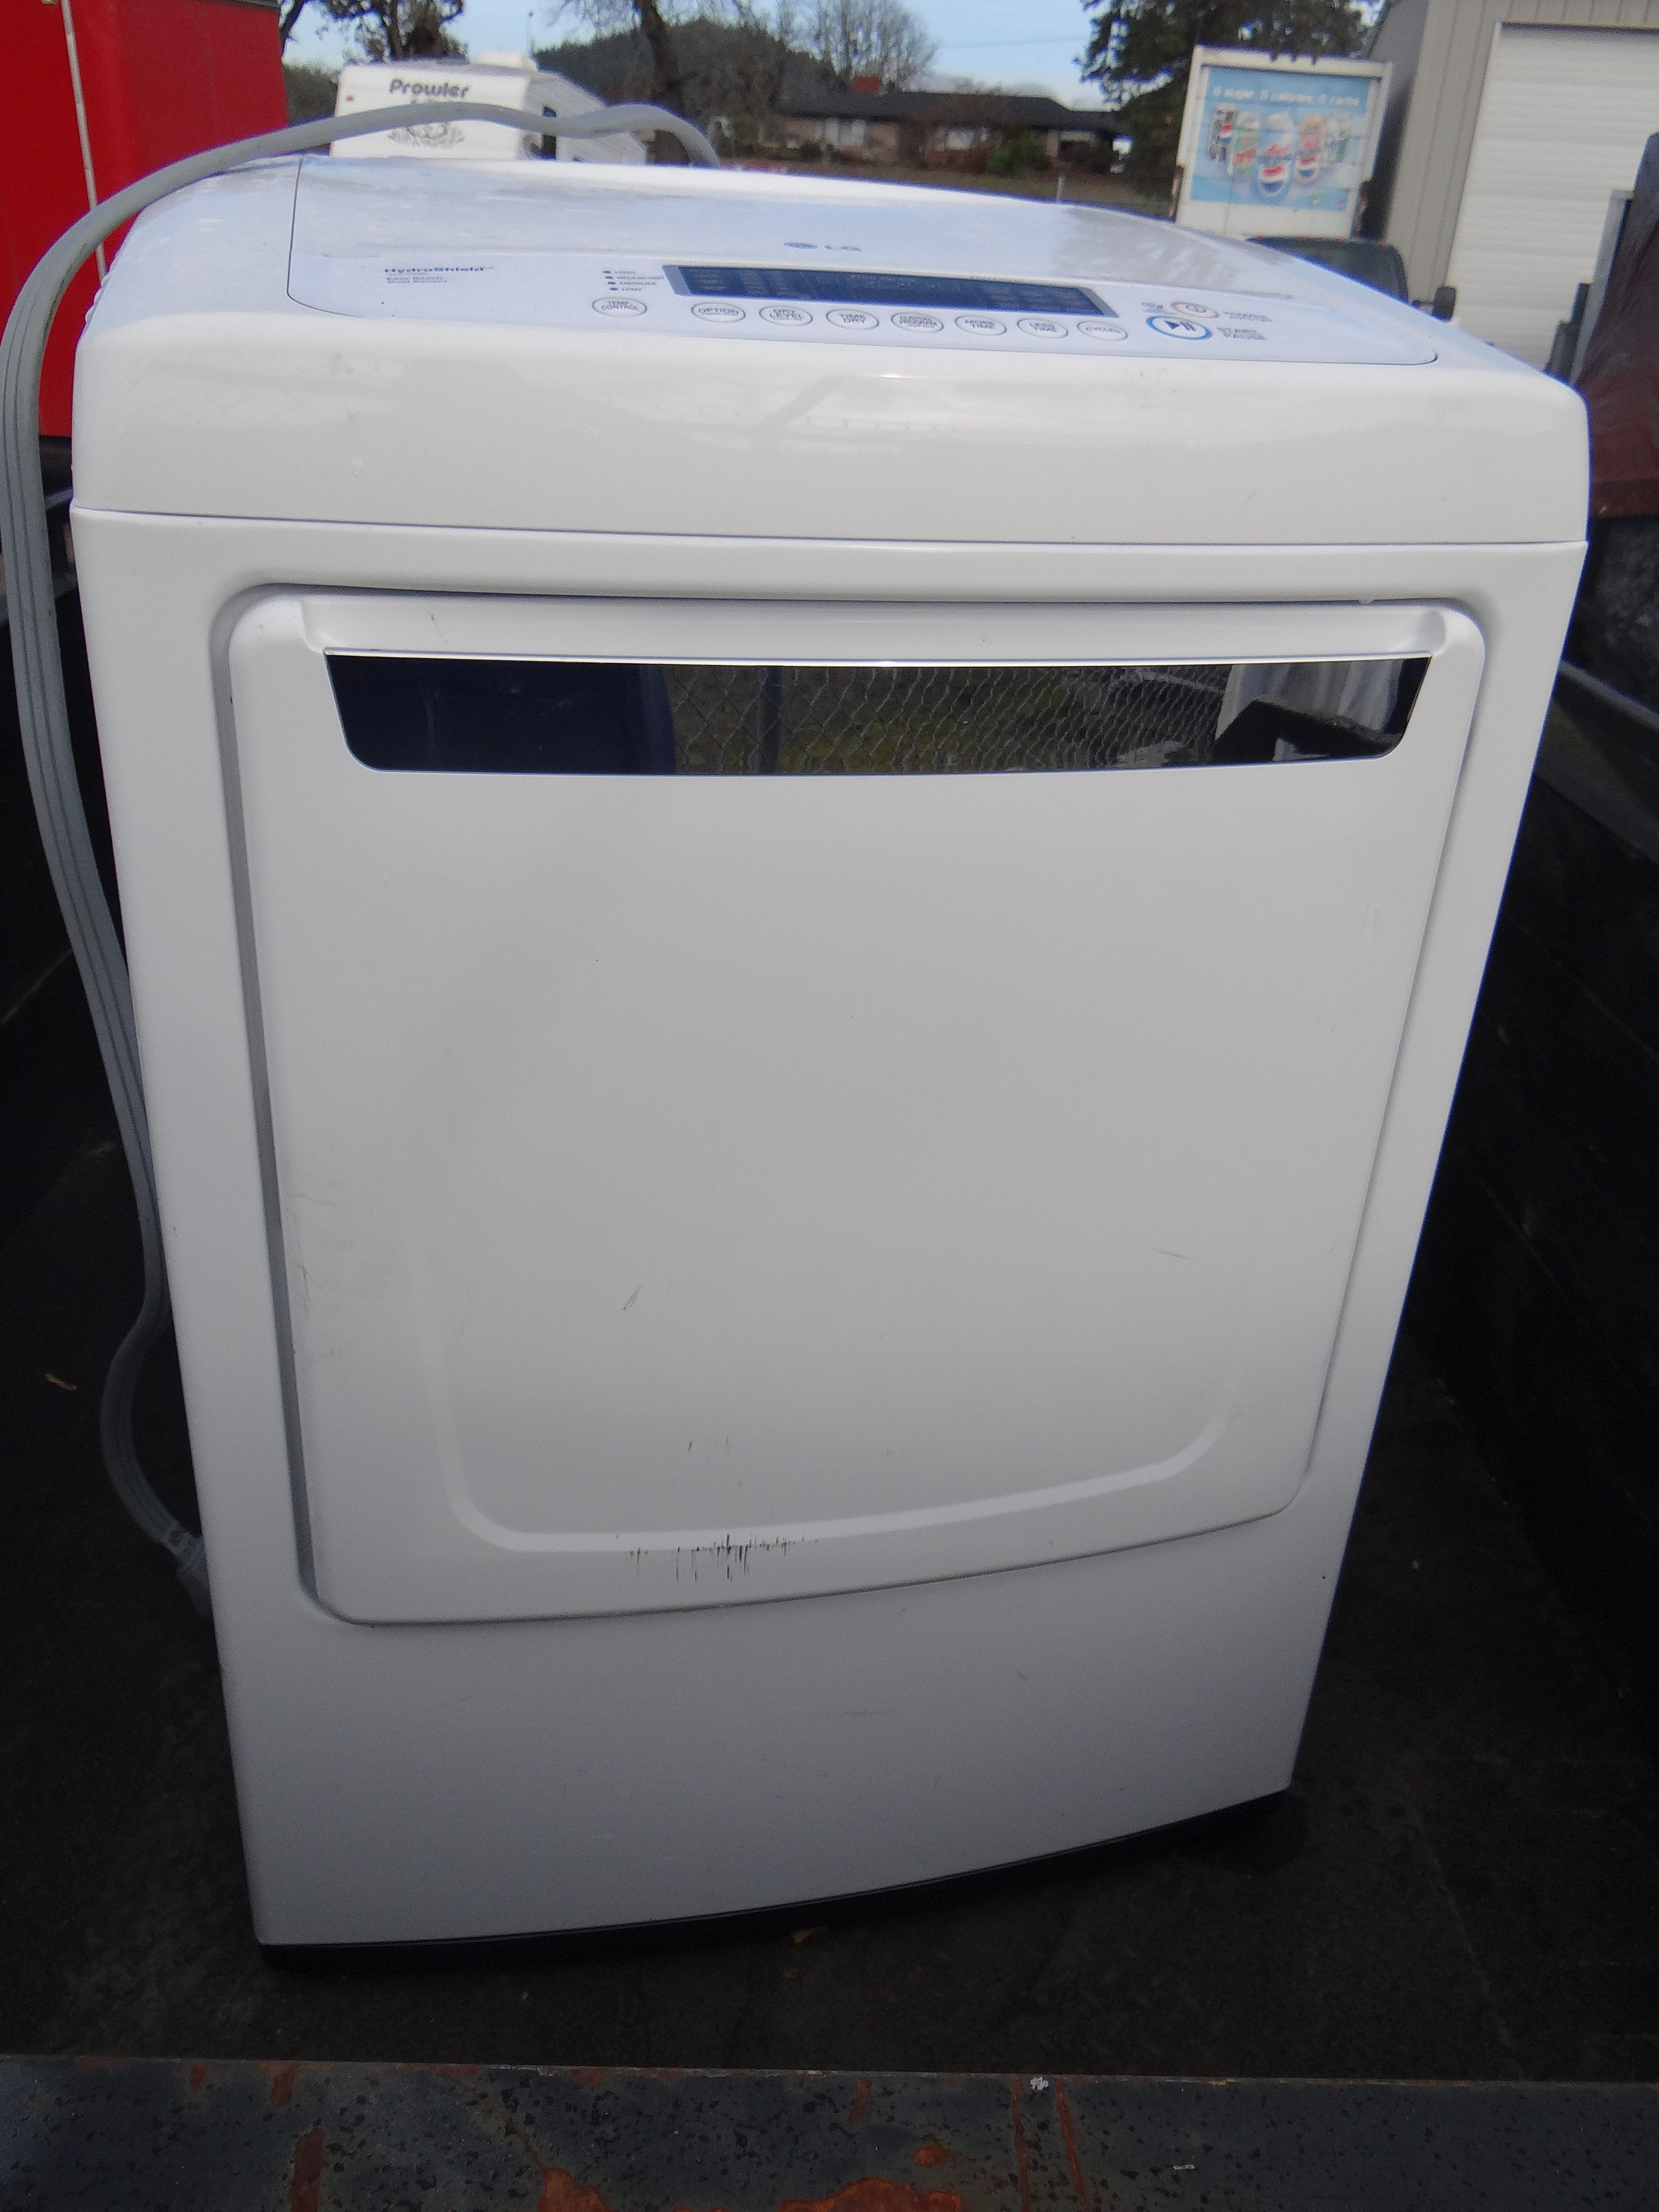 MM117-LG 7.3 cu ft Large Capacity Hydro Shield Electric Dryer (scratches on front see pic)